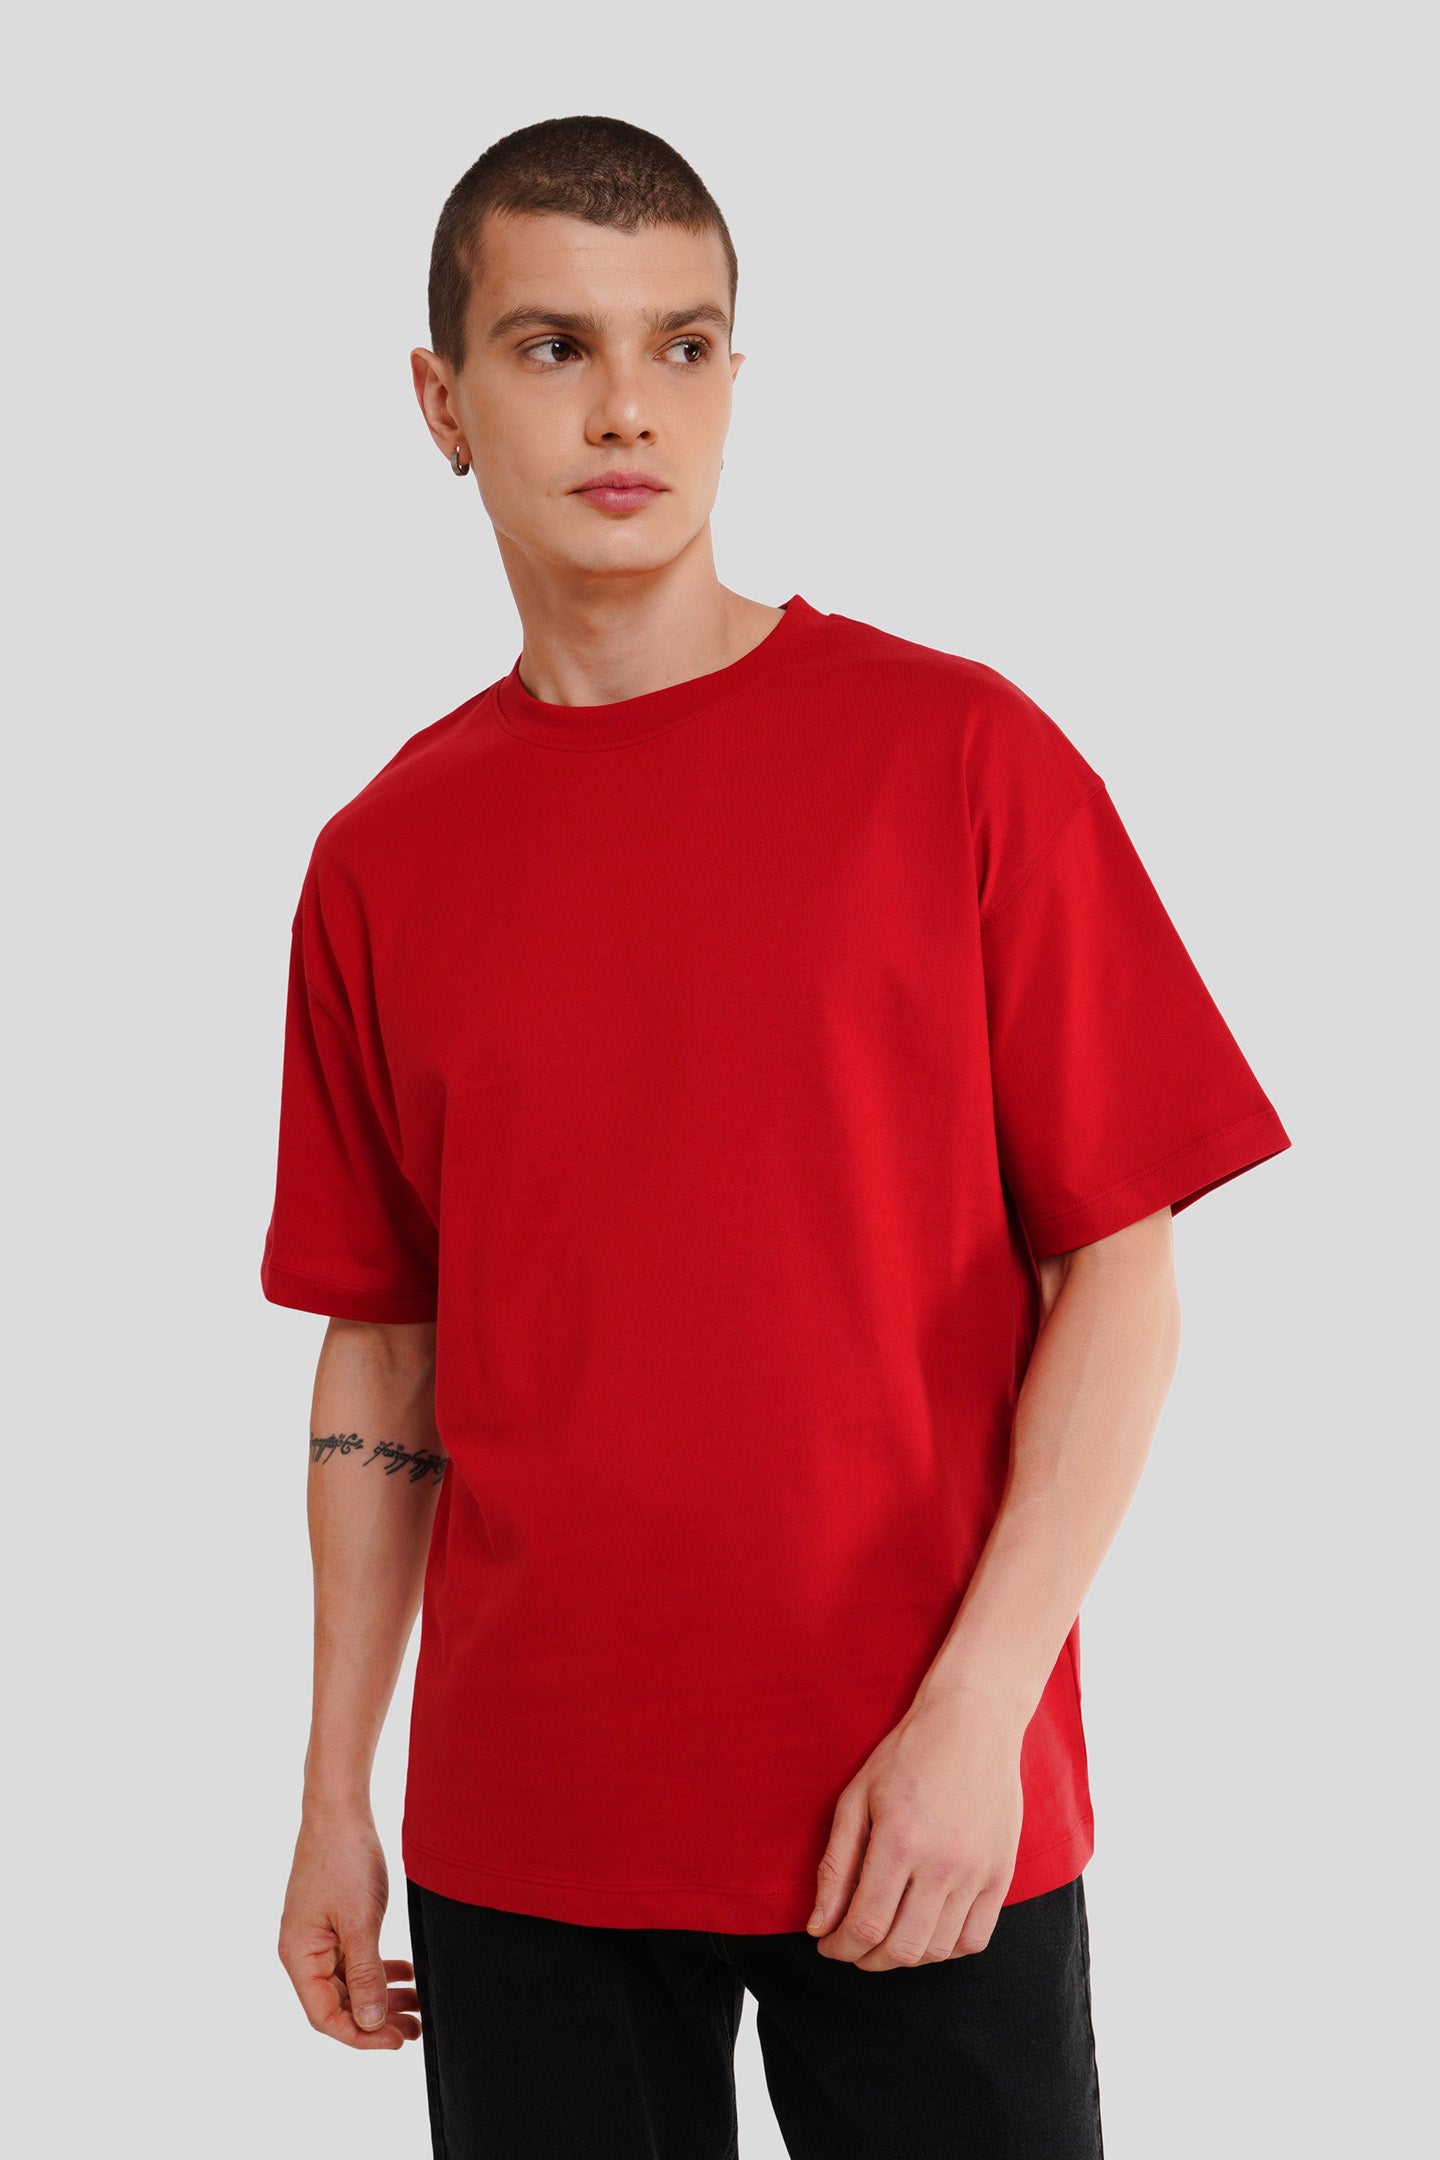 Smile Red Printed T Shirt Men Oversized Fit With Back Design Pic 1